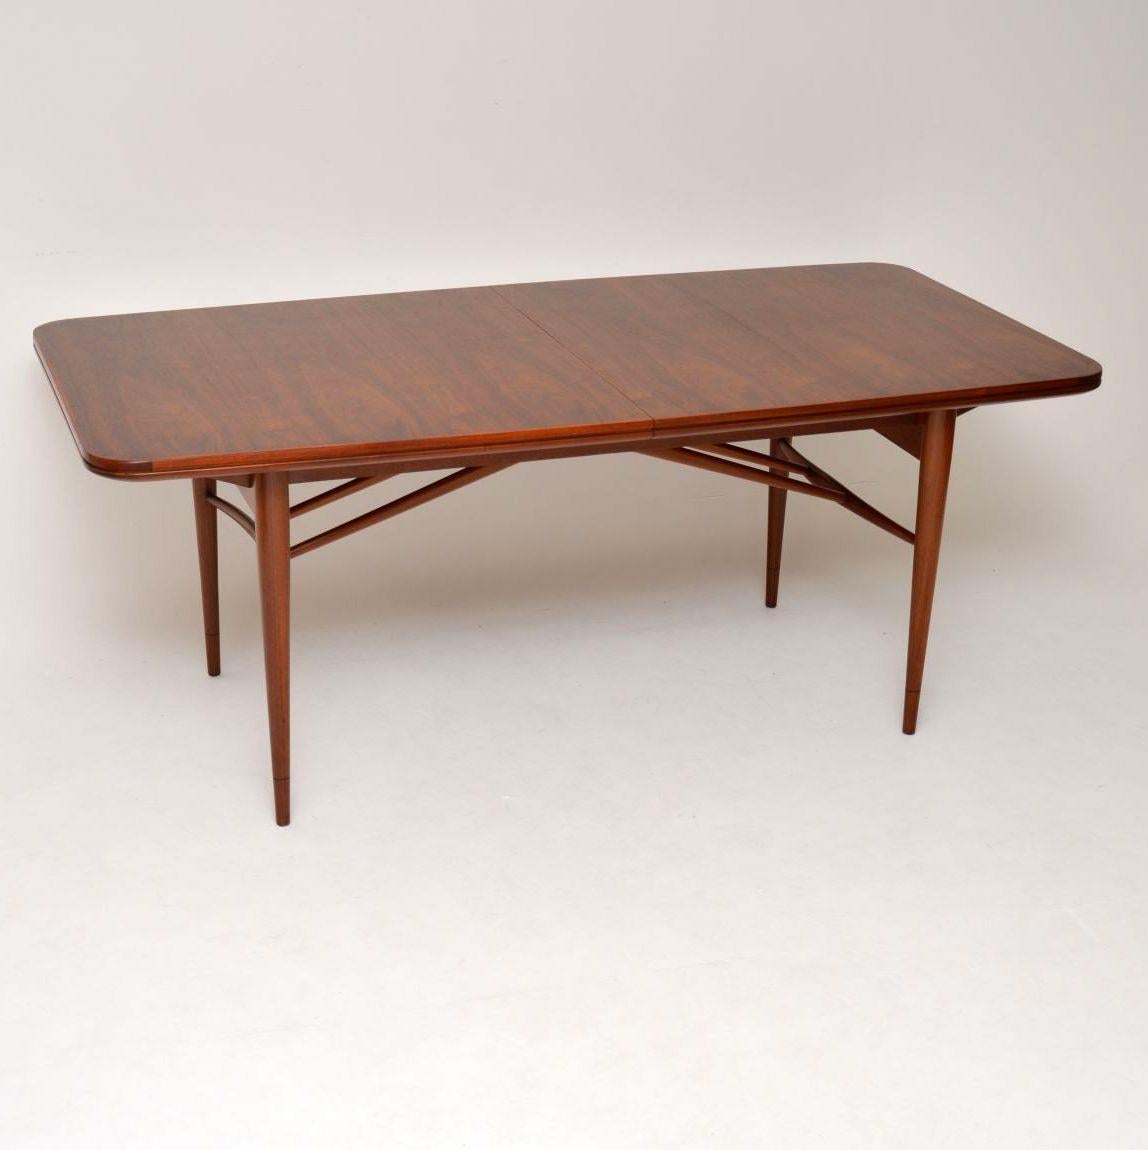 A beautiful and very rare dining table in walnut, this was designed by Robert Heritage and made by Archie Shine in the 1960s. It has a fantastic design, with two extra leaves to extend the dining surface. The leaves can be stored beneath the